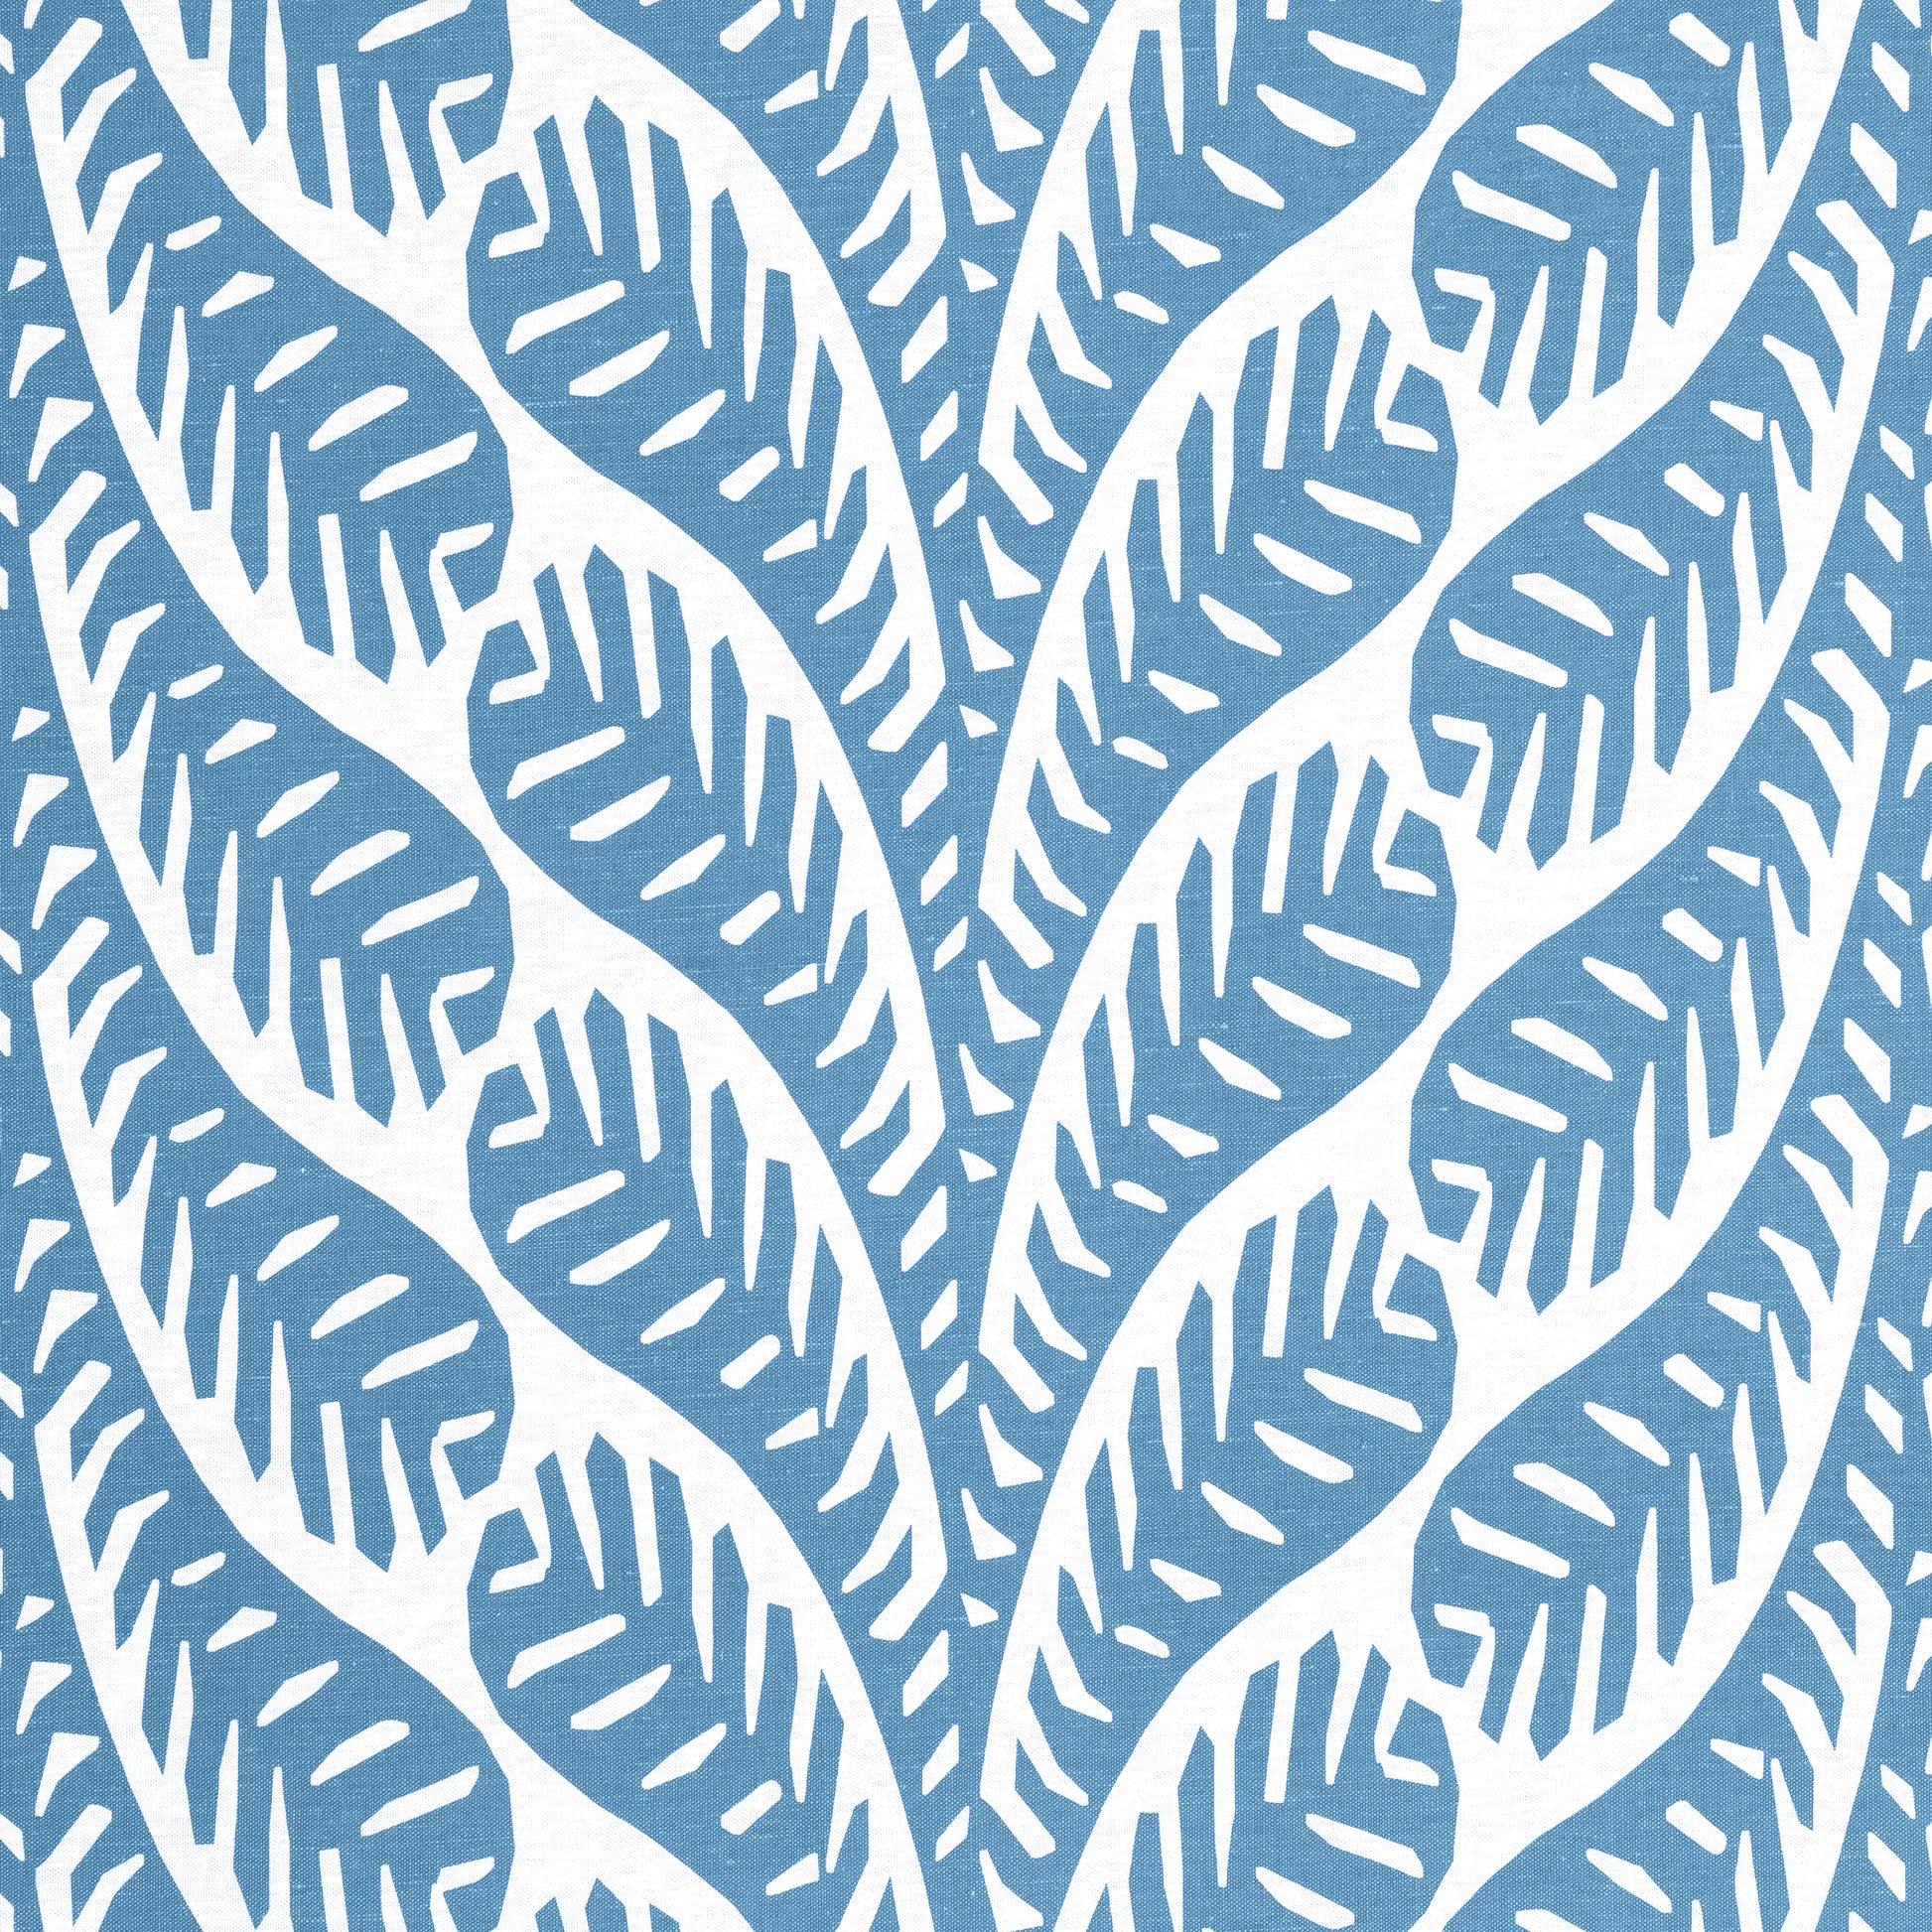 Purchase Thibaut Fabric Pattern number F920848 pattern name Ginger color Blue